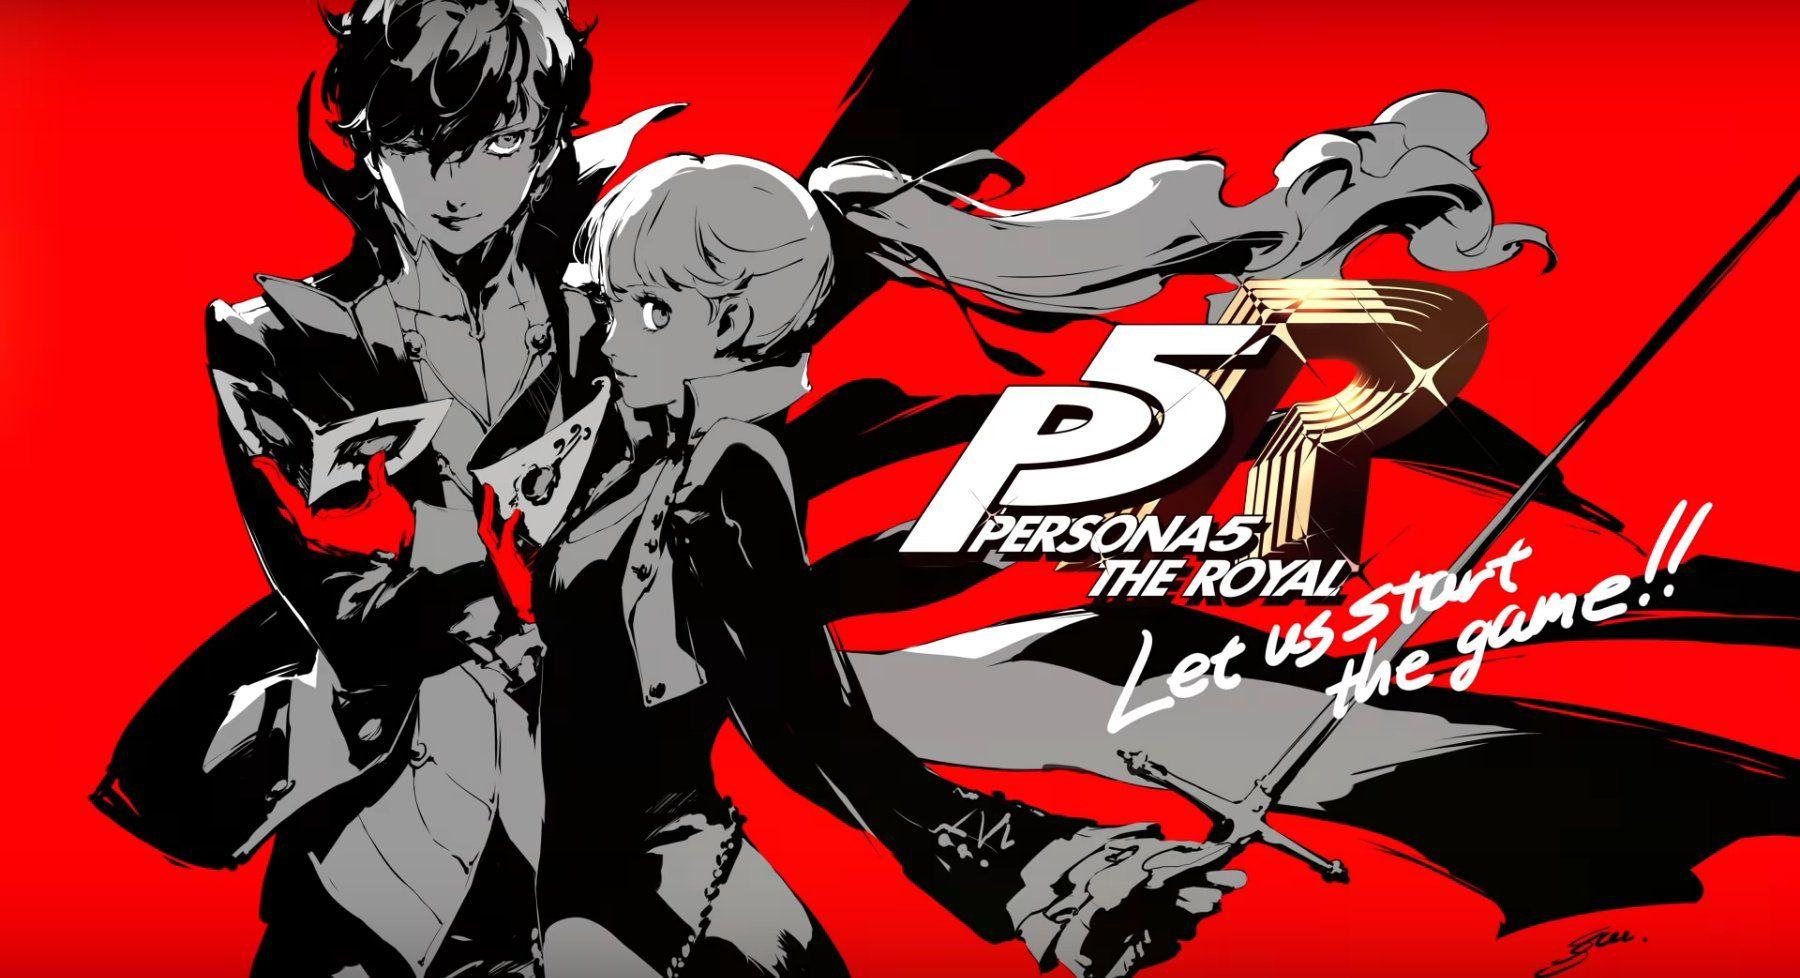 Featured image of post 1440P Persona 5 Desktop Wallpaper Support us by sharing the content upvoting wallpapers on the page or sending your own